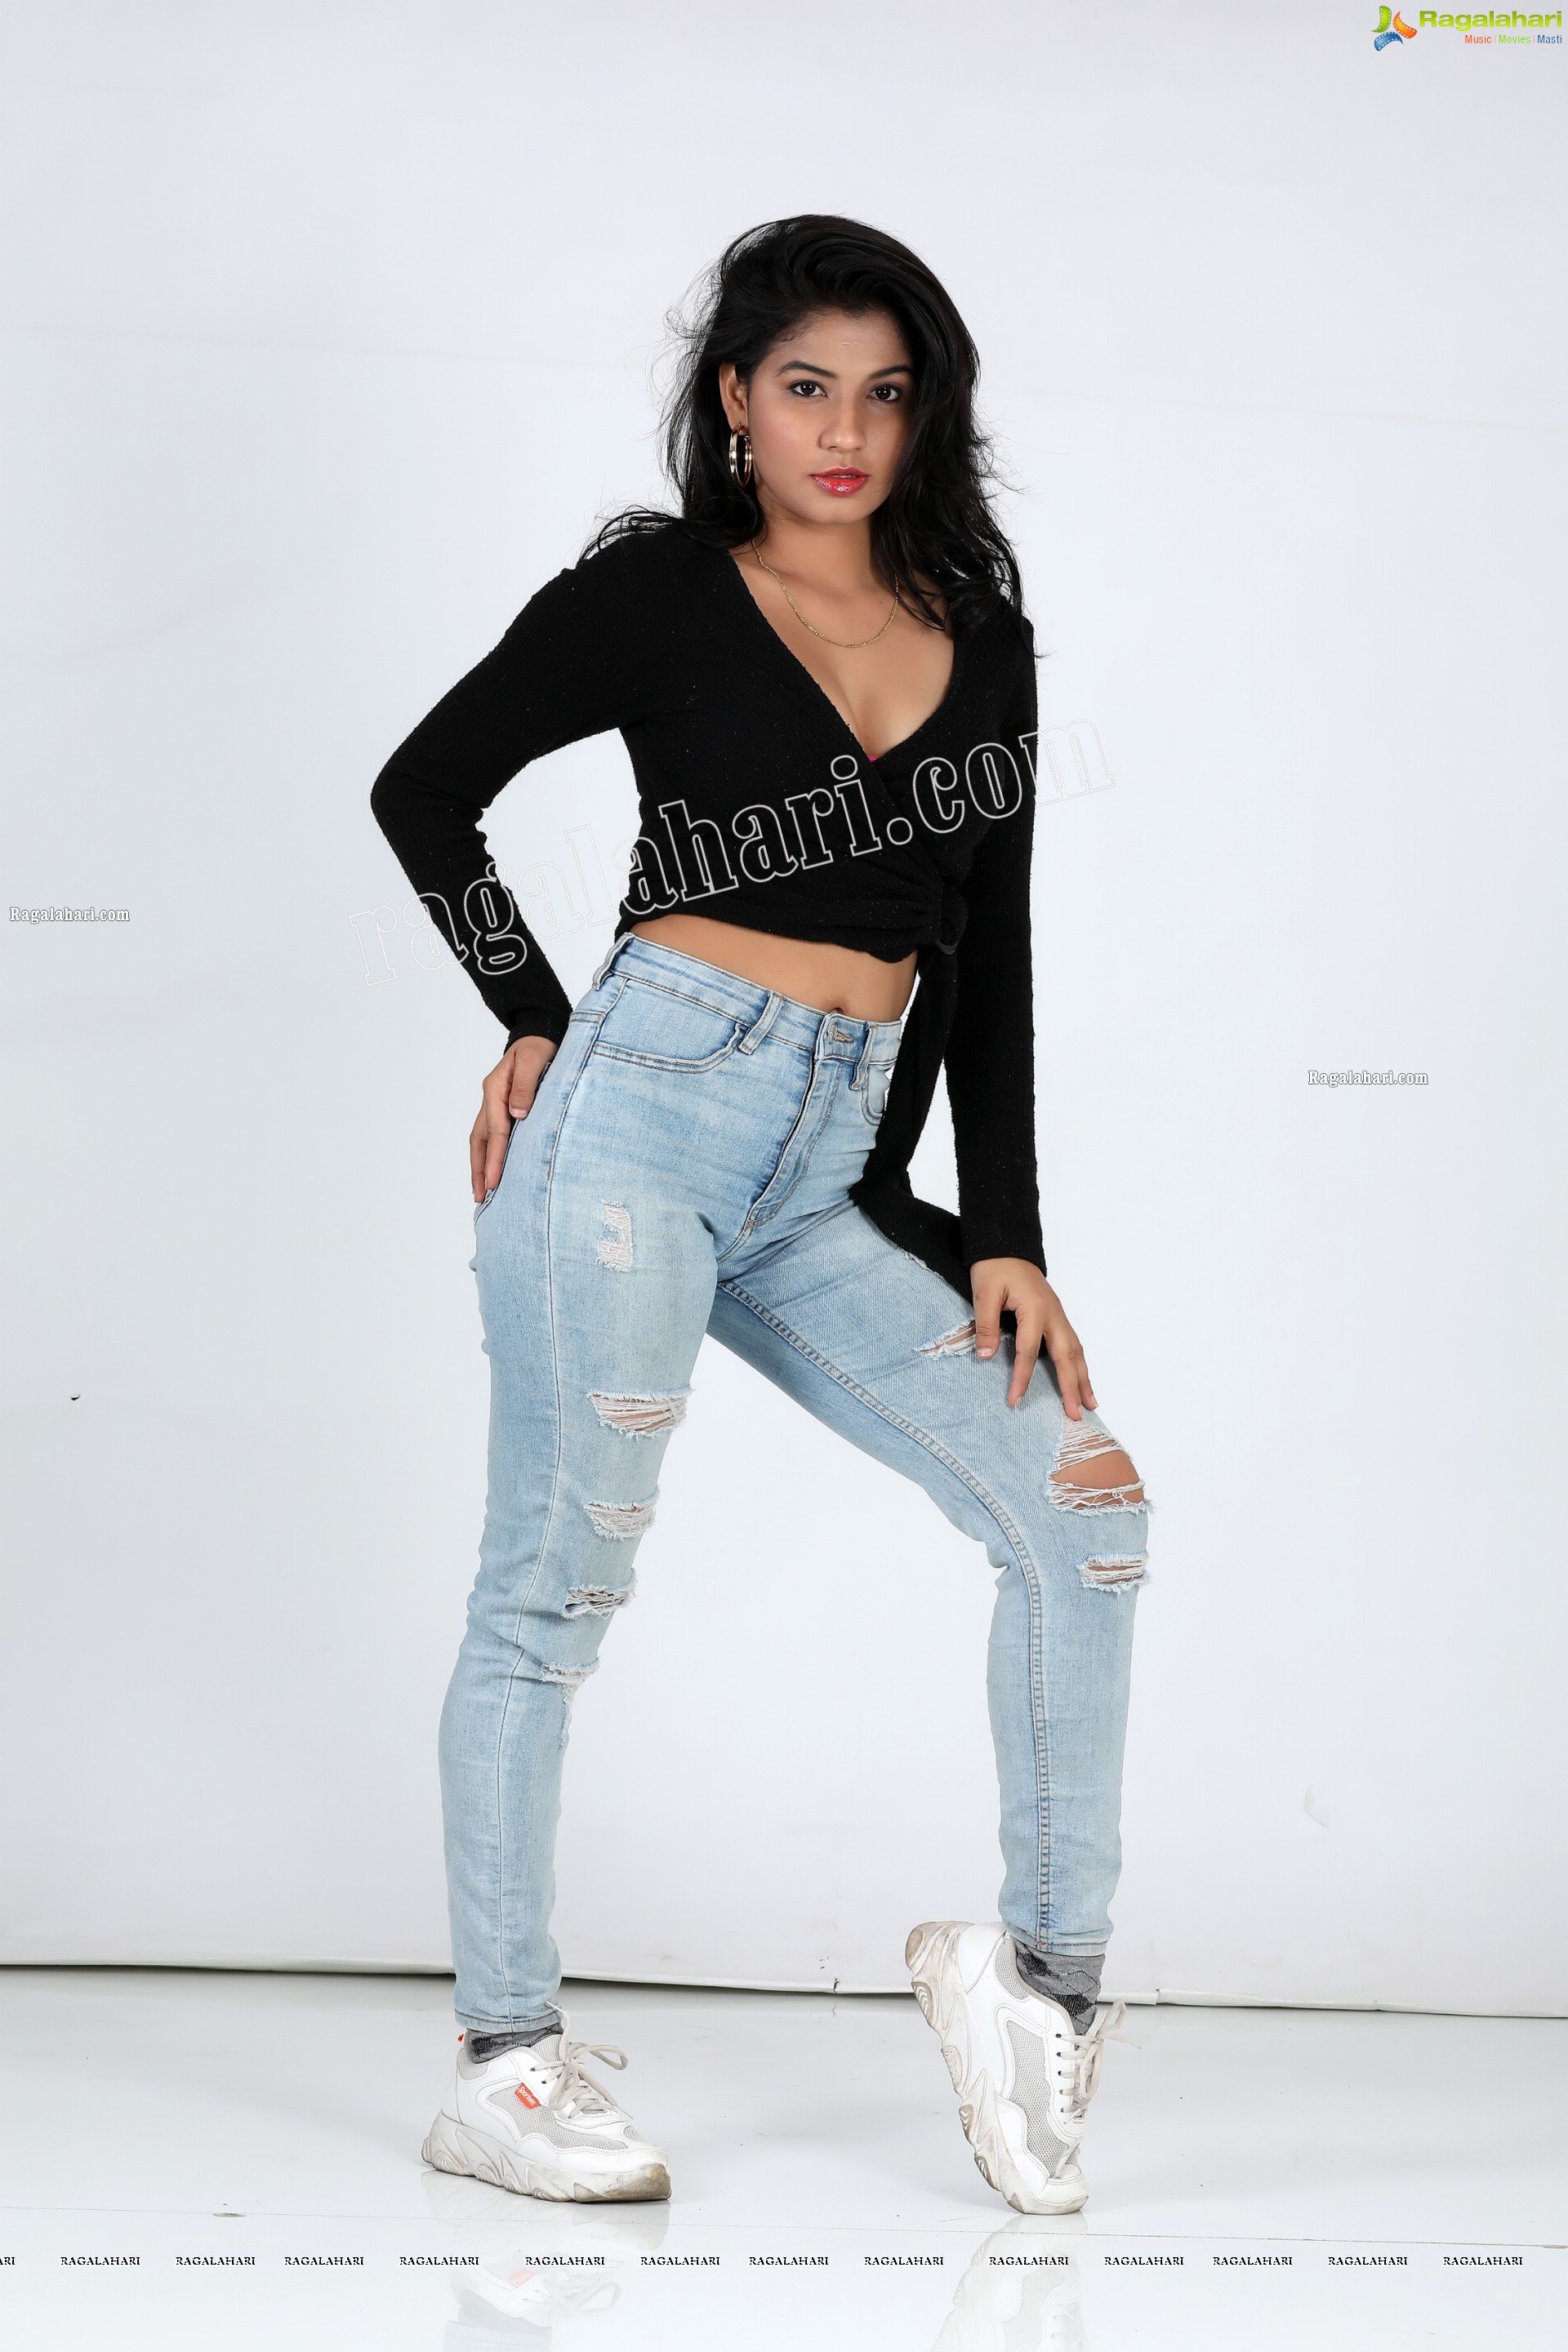 Sheetal Bhatt in Black Twisted Style Knit Crop Top and Jeans Exclusive Photo Shoot